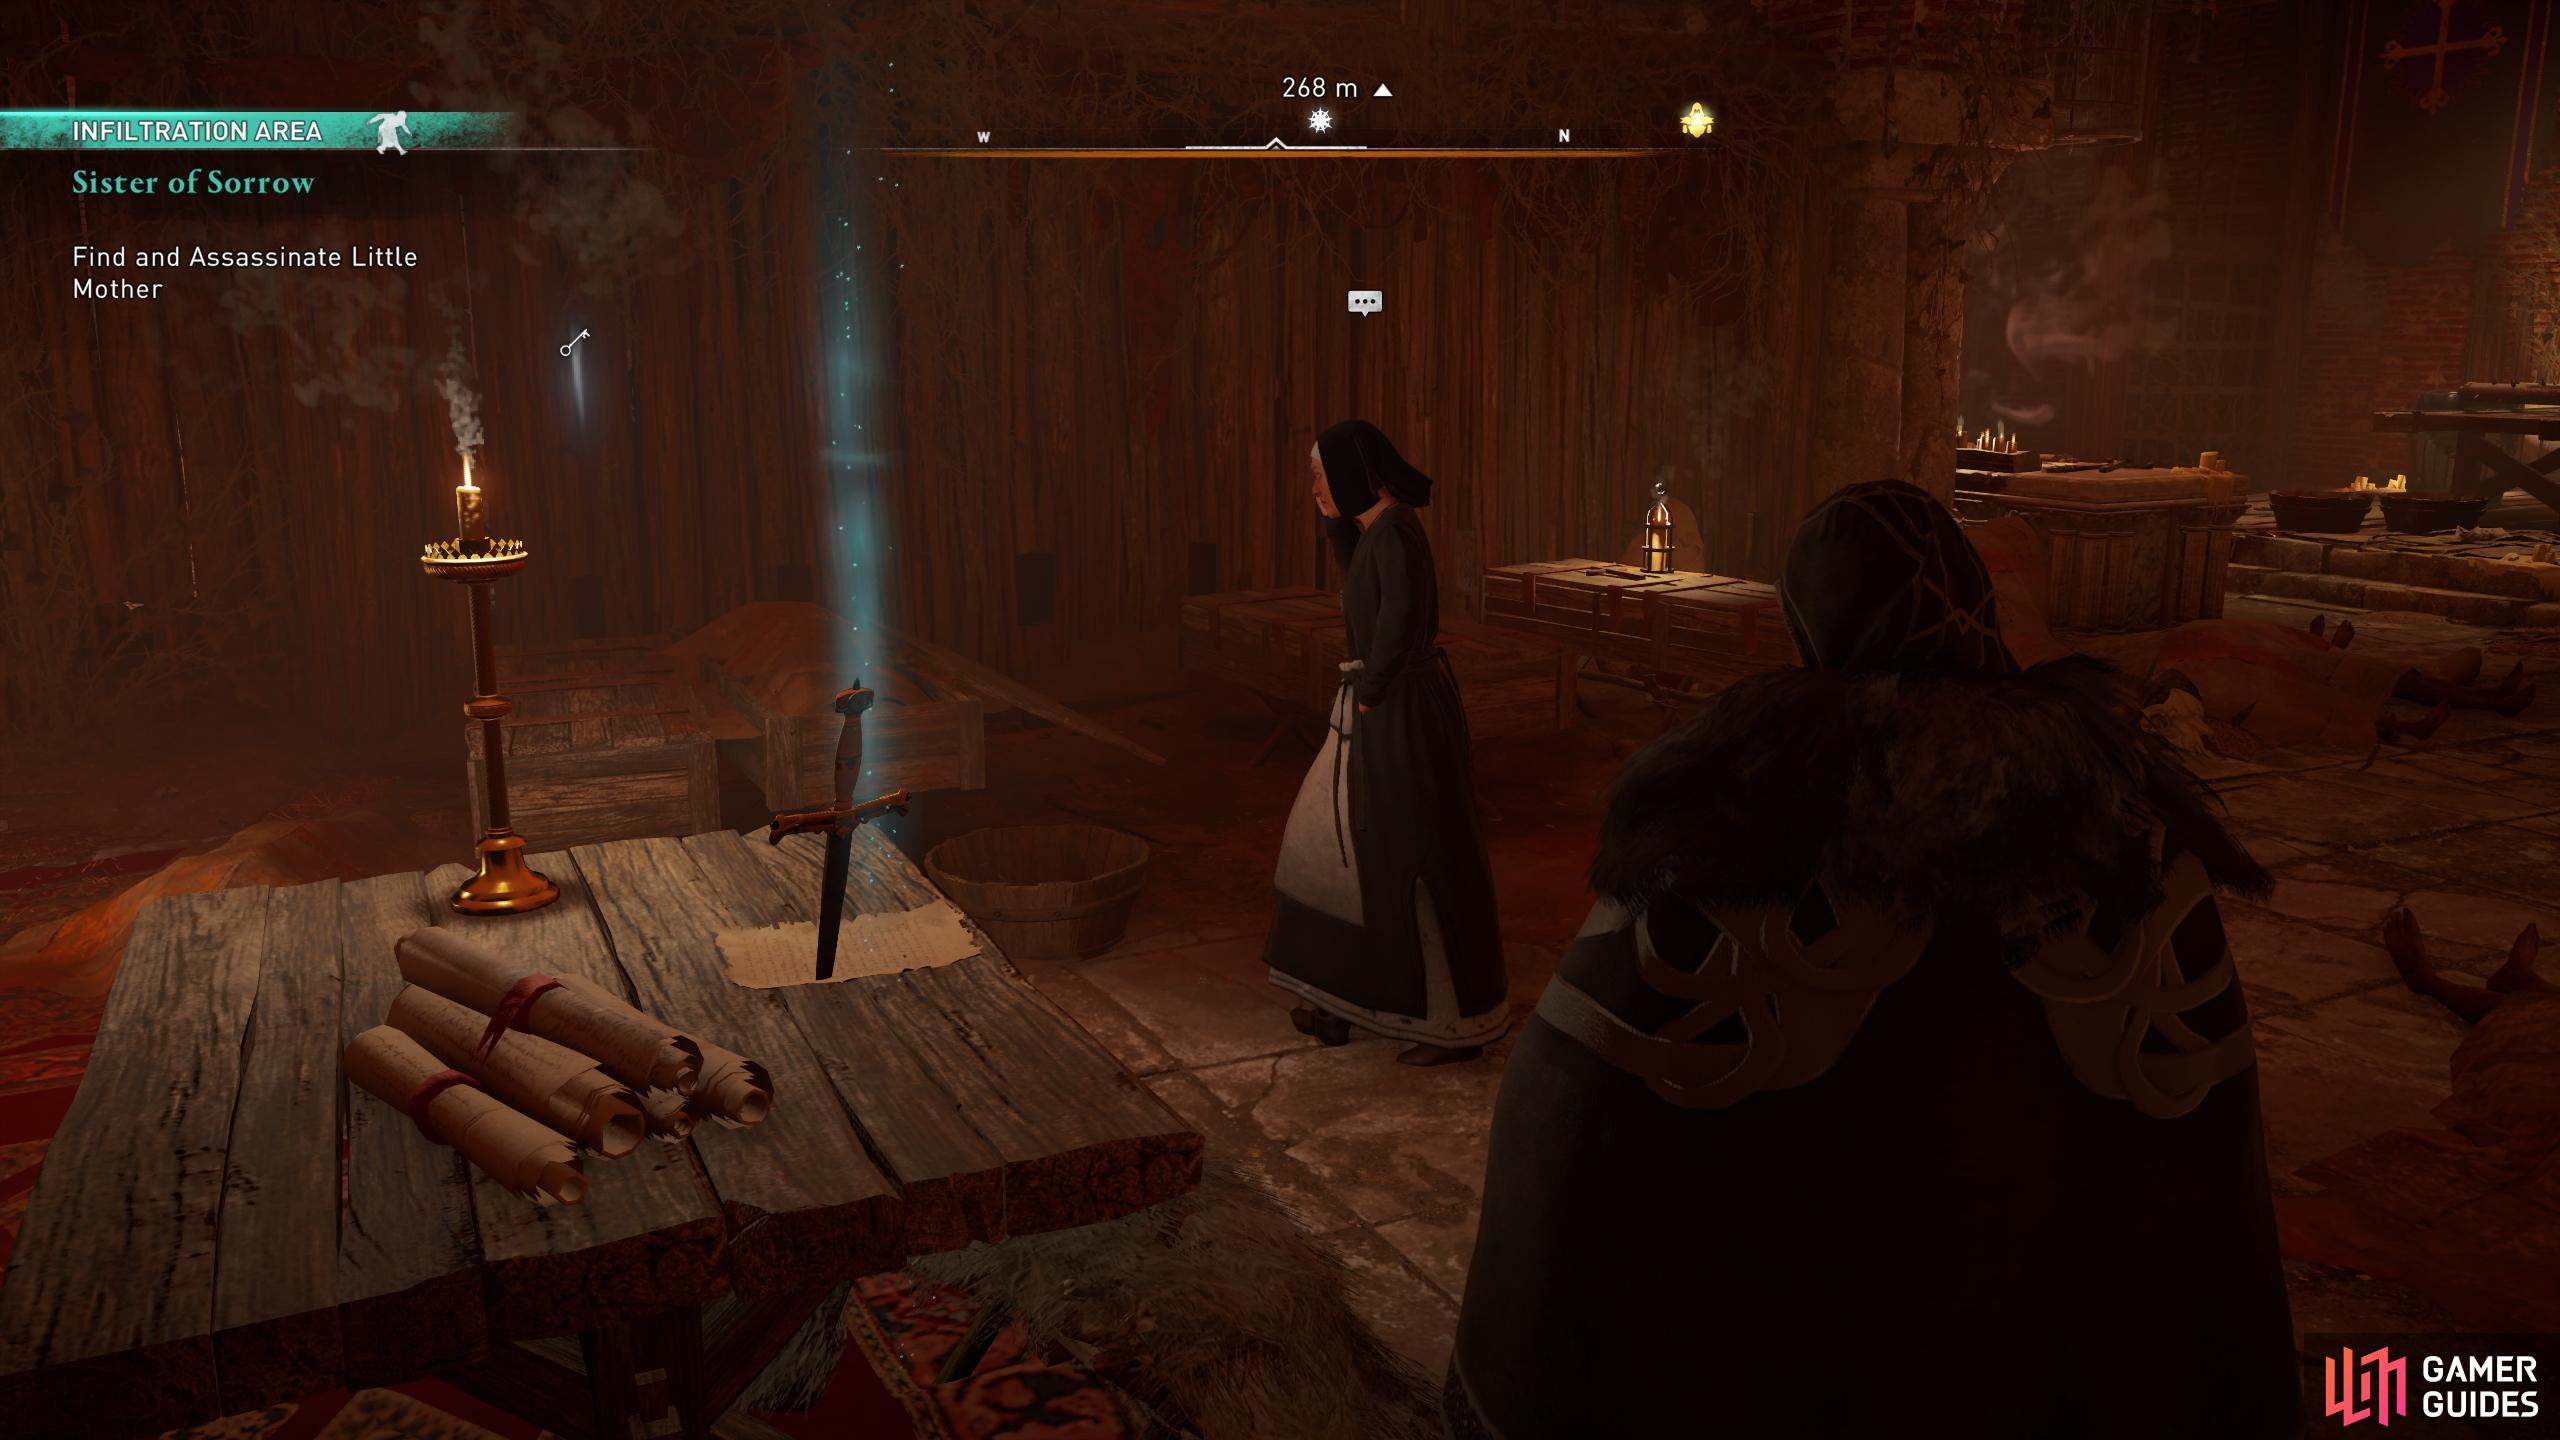 Interact with the knife within the crypt to learn about the ritual.